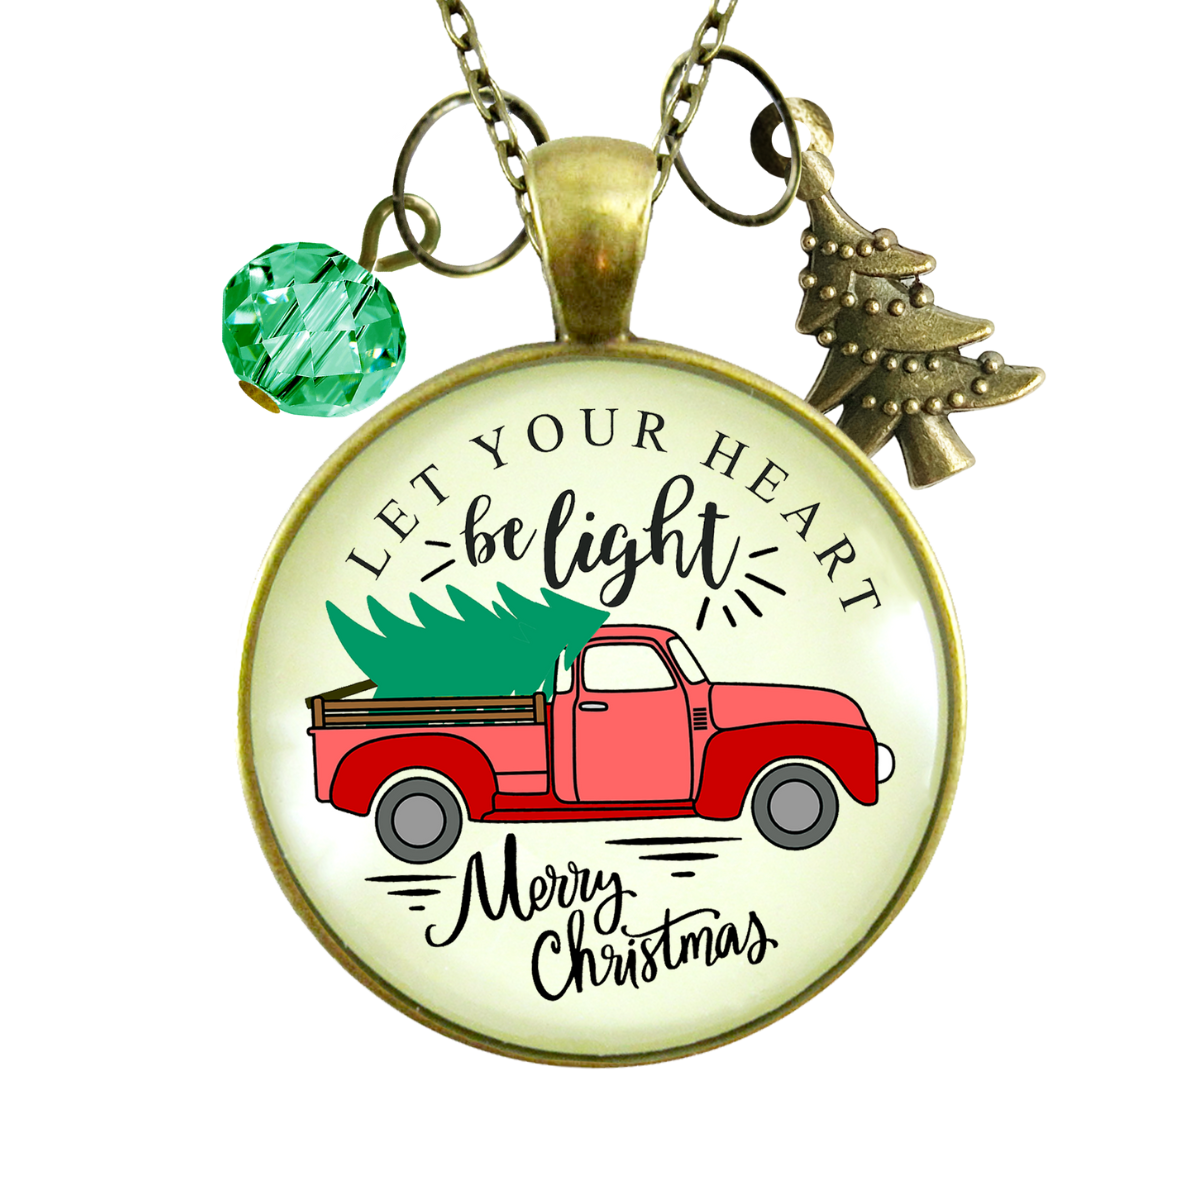 Red Truck Christmas Tree Necklace Handmade Holiday Let Your Heart Be Light Charm Gift Pendant Jewelry  Necklace - Gutsy Goodness Handmade Jewelry